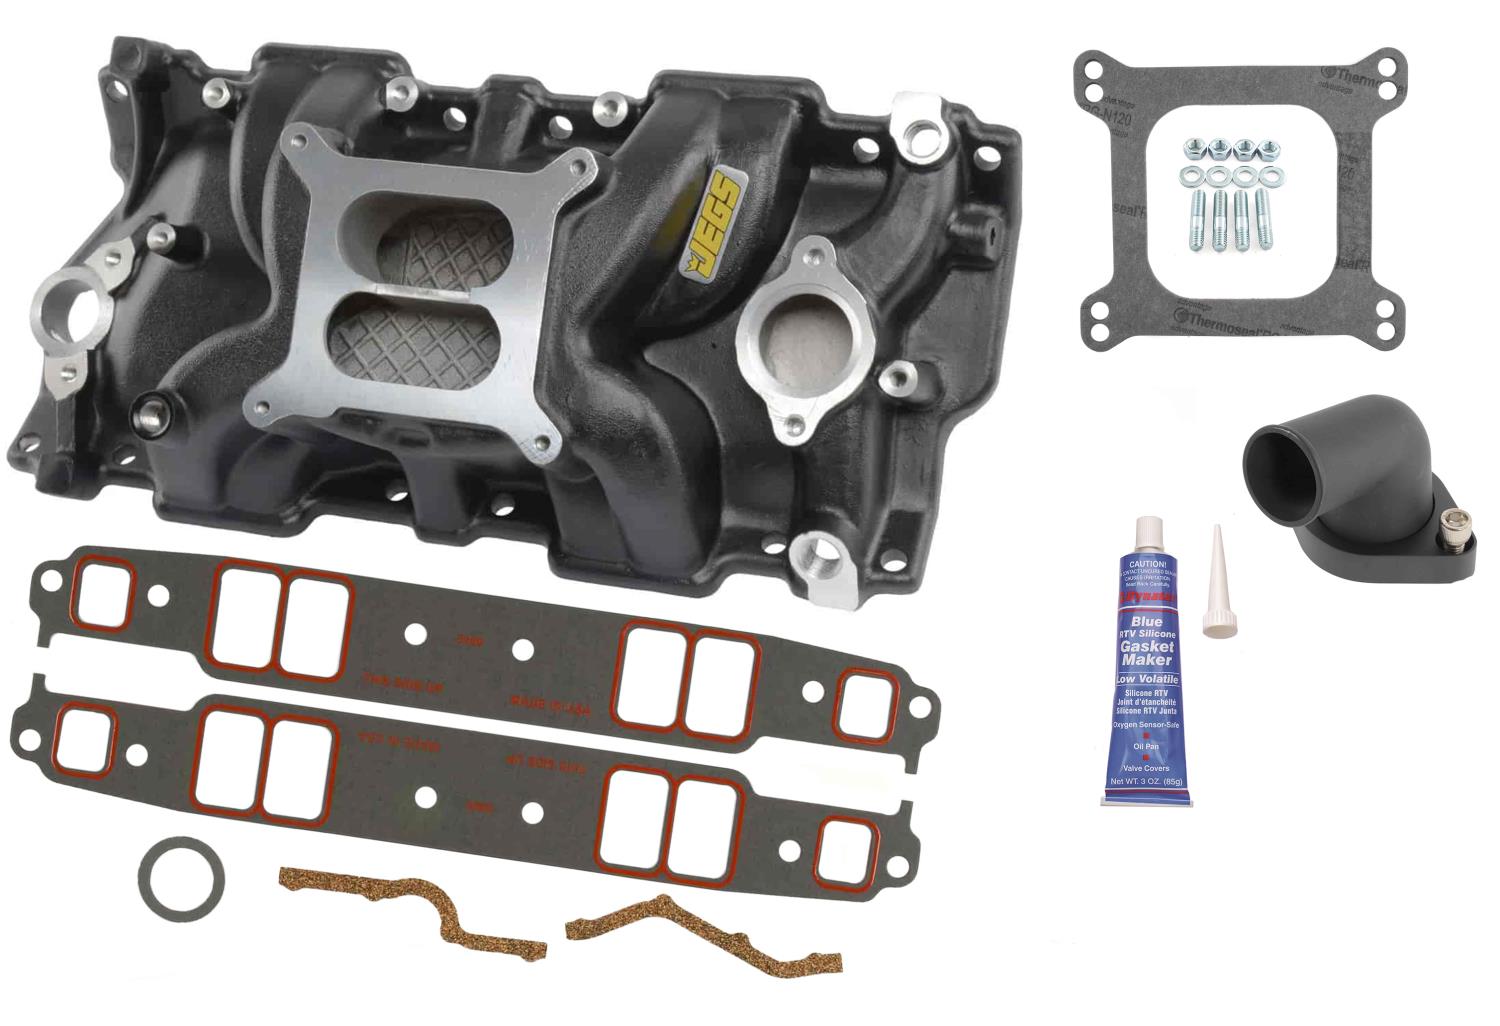 Intake Manifold Kit for 1955-1986 Small Block Chevy 262-400